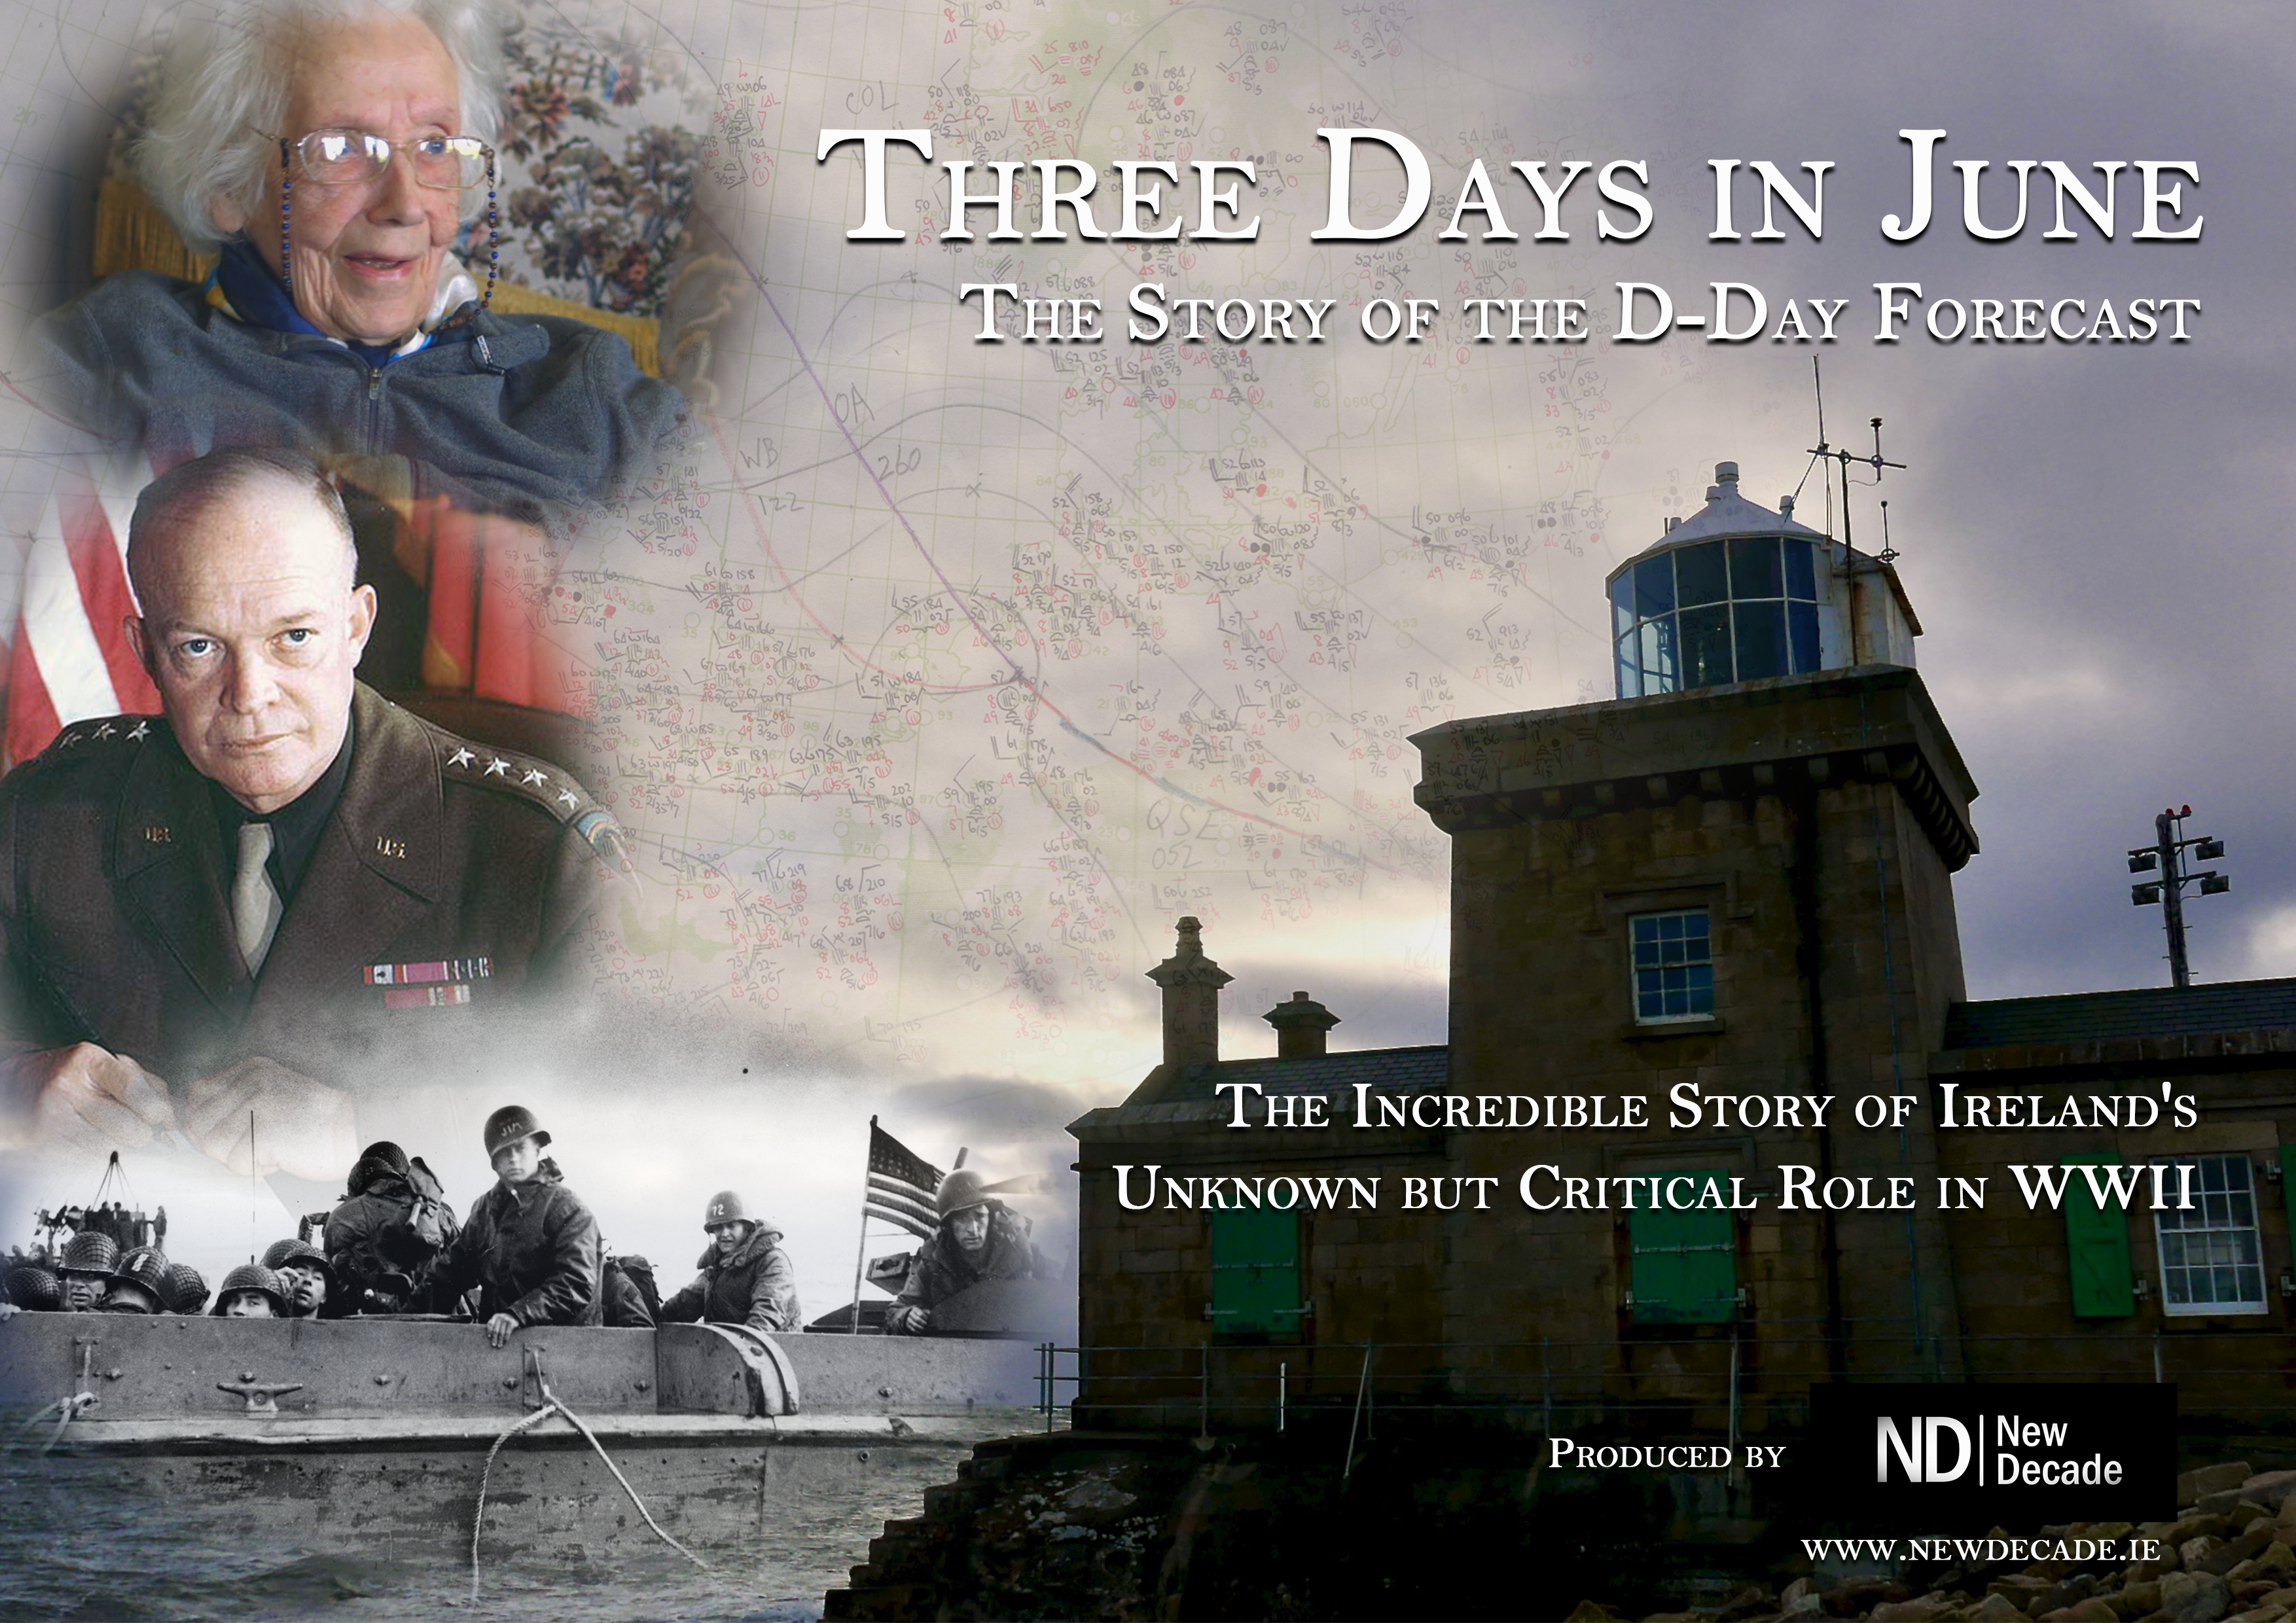 “Storm Front in Mayo – The Story of the D-Day Forecast” – RTÉ One, Thurs 6th June 2019